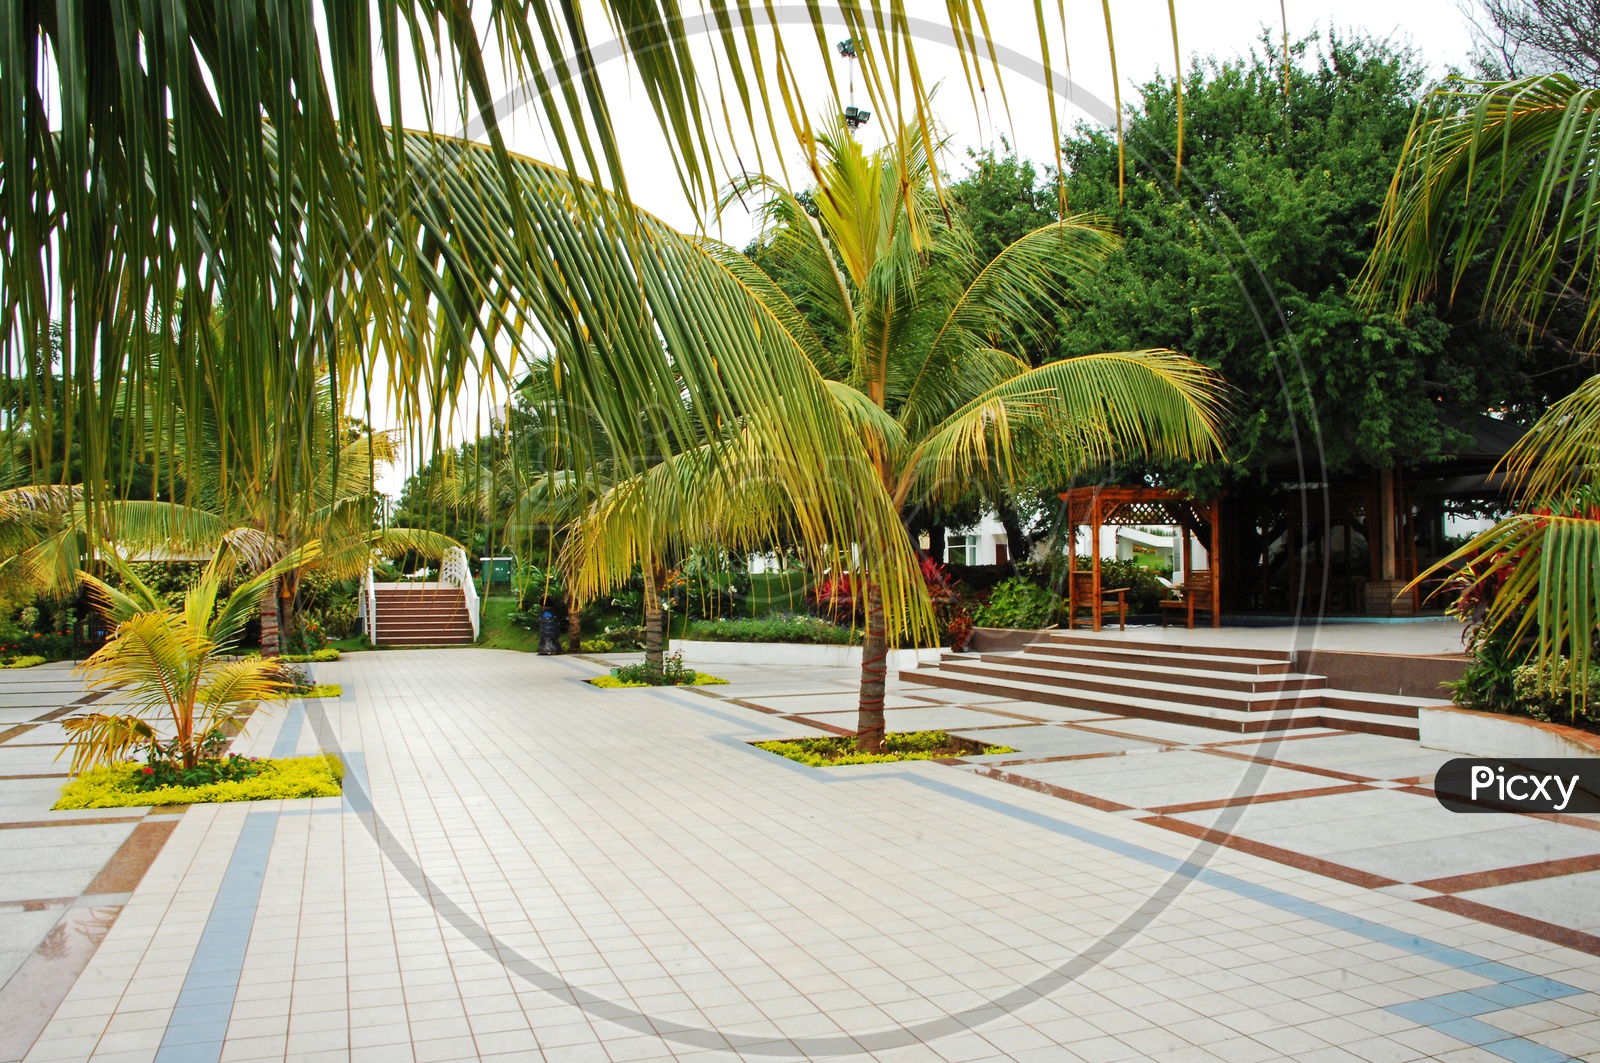 Pathways In a Resort With Coconut Trees On Both Sides